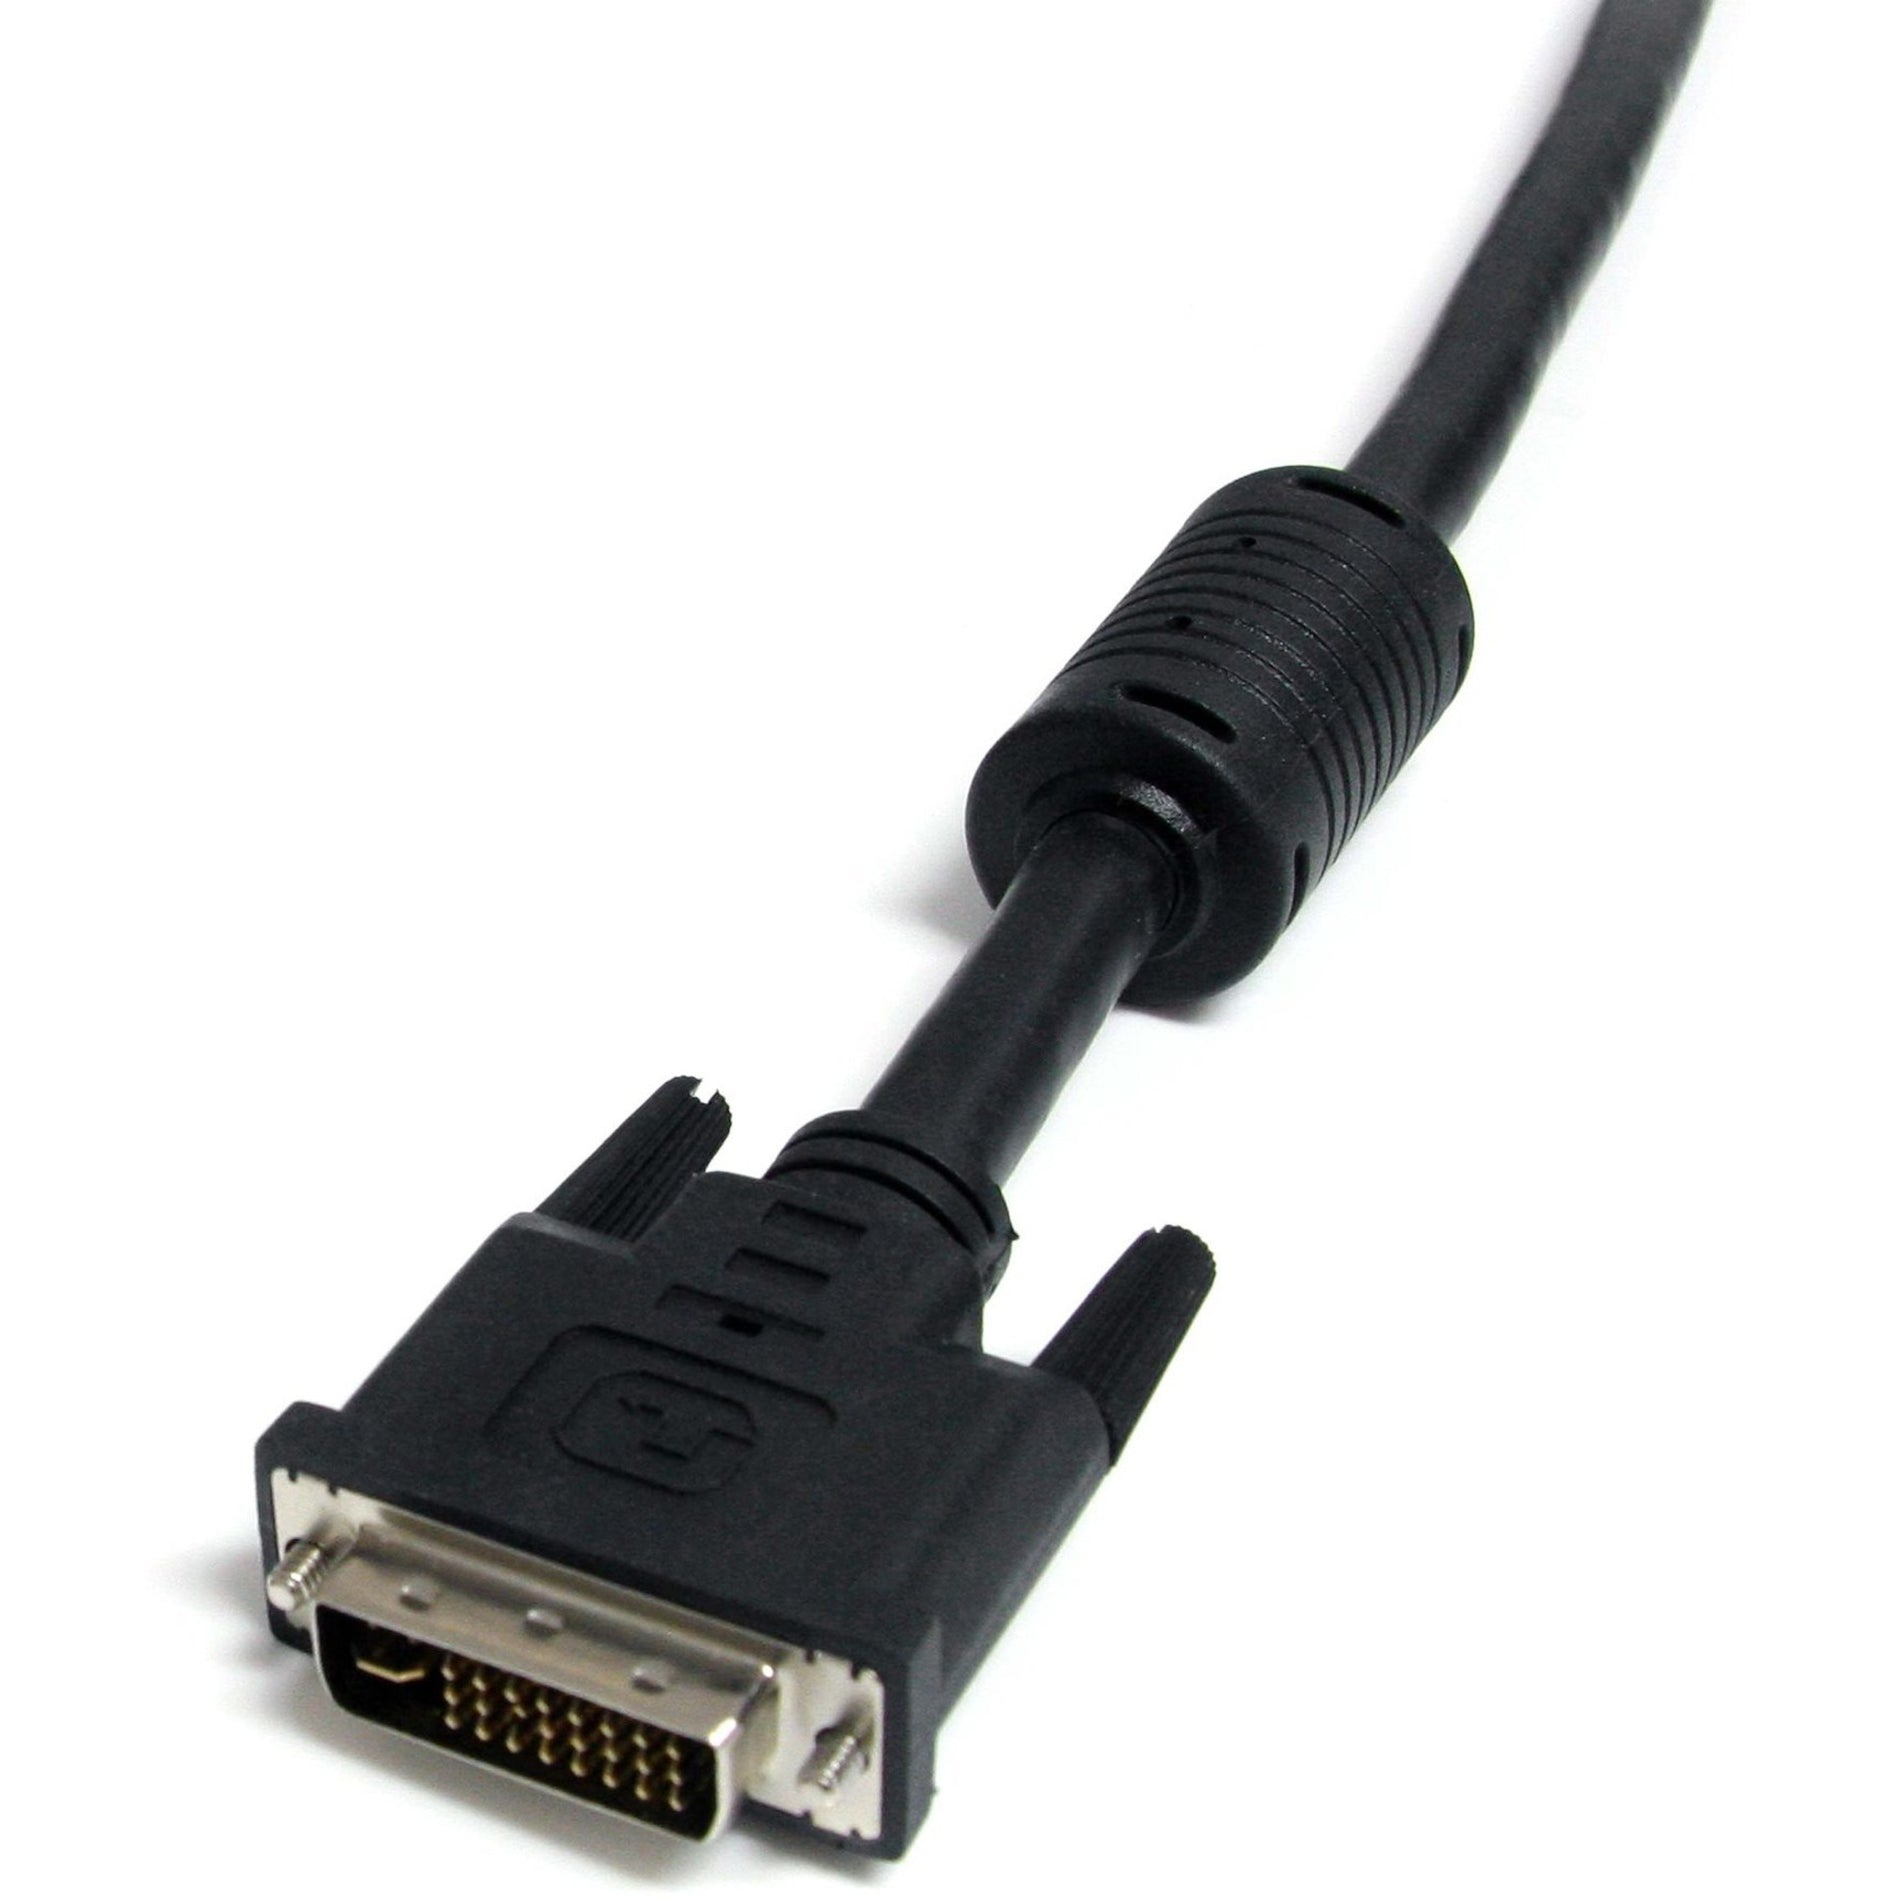 StarTech.com DVIIDMM20 DVI-I Dual Link Display Cable, 20 ft, EMI Protection, 9.9 Gbit/s Data Transfer Rate